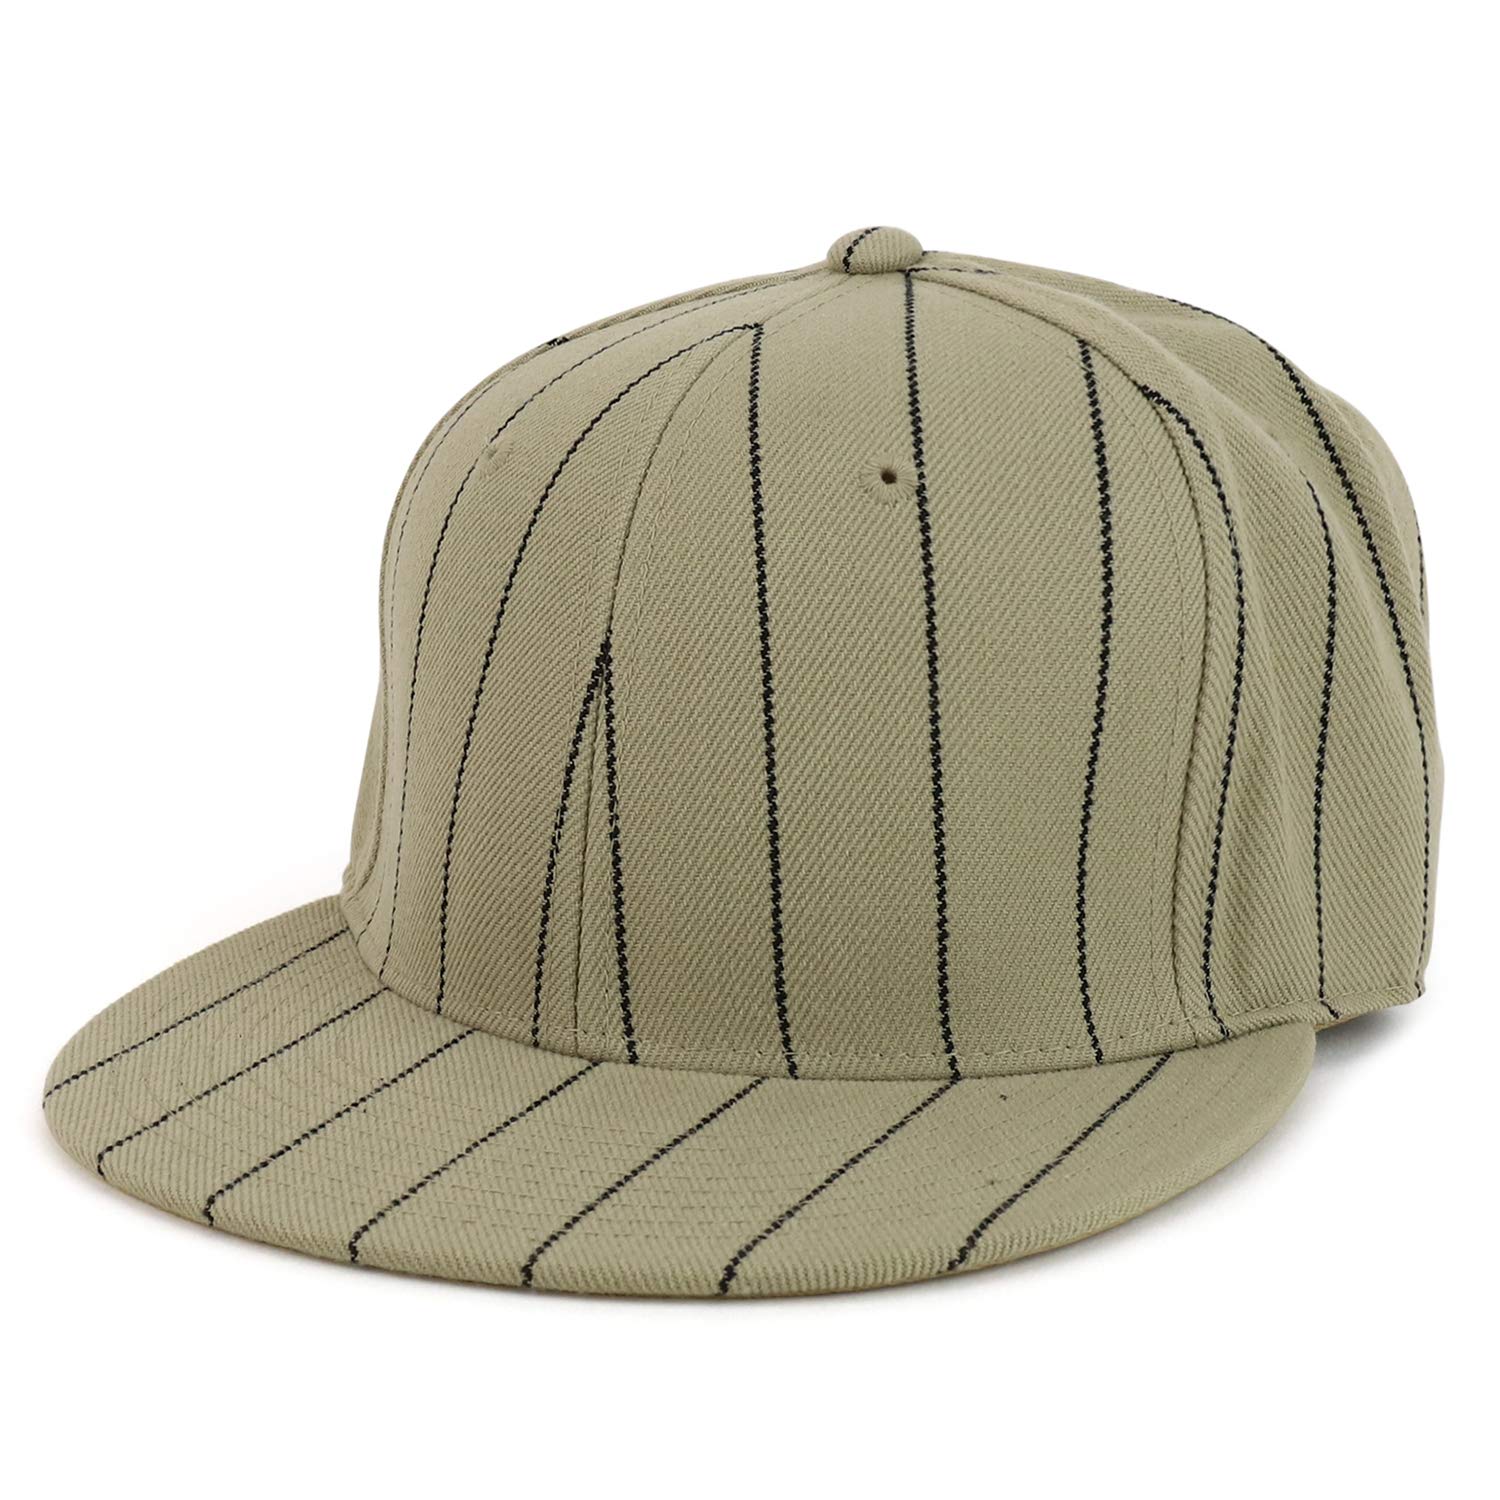 Armycrew Pin Striped Structured Flatbill Fitted Baseball Cap - Khaki - 7 1/4